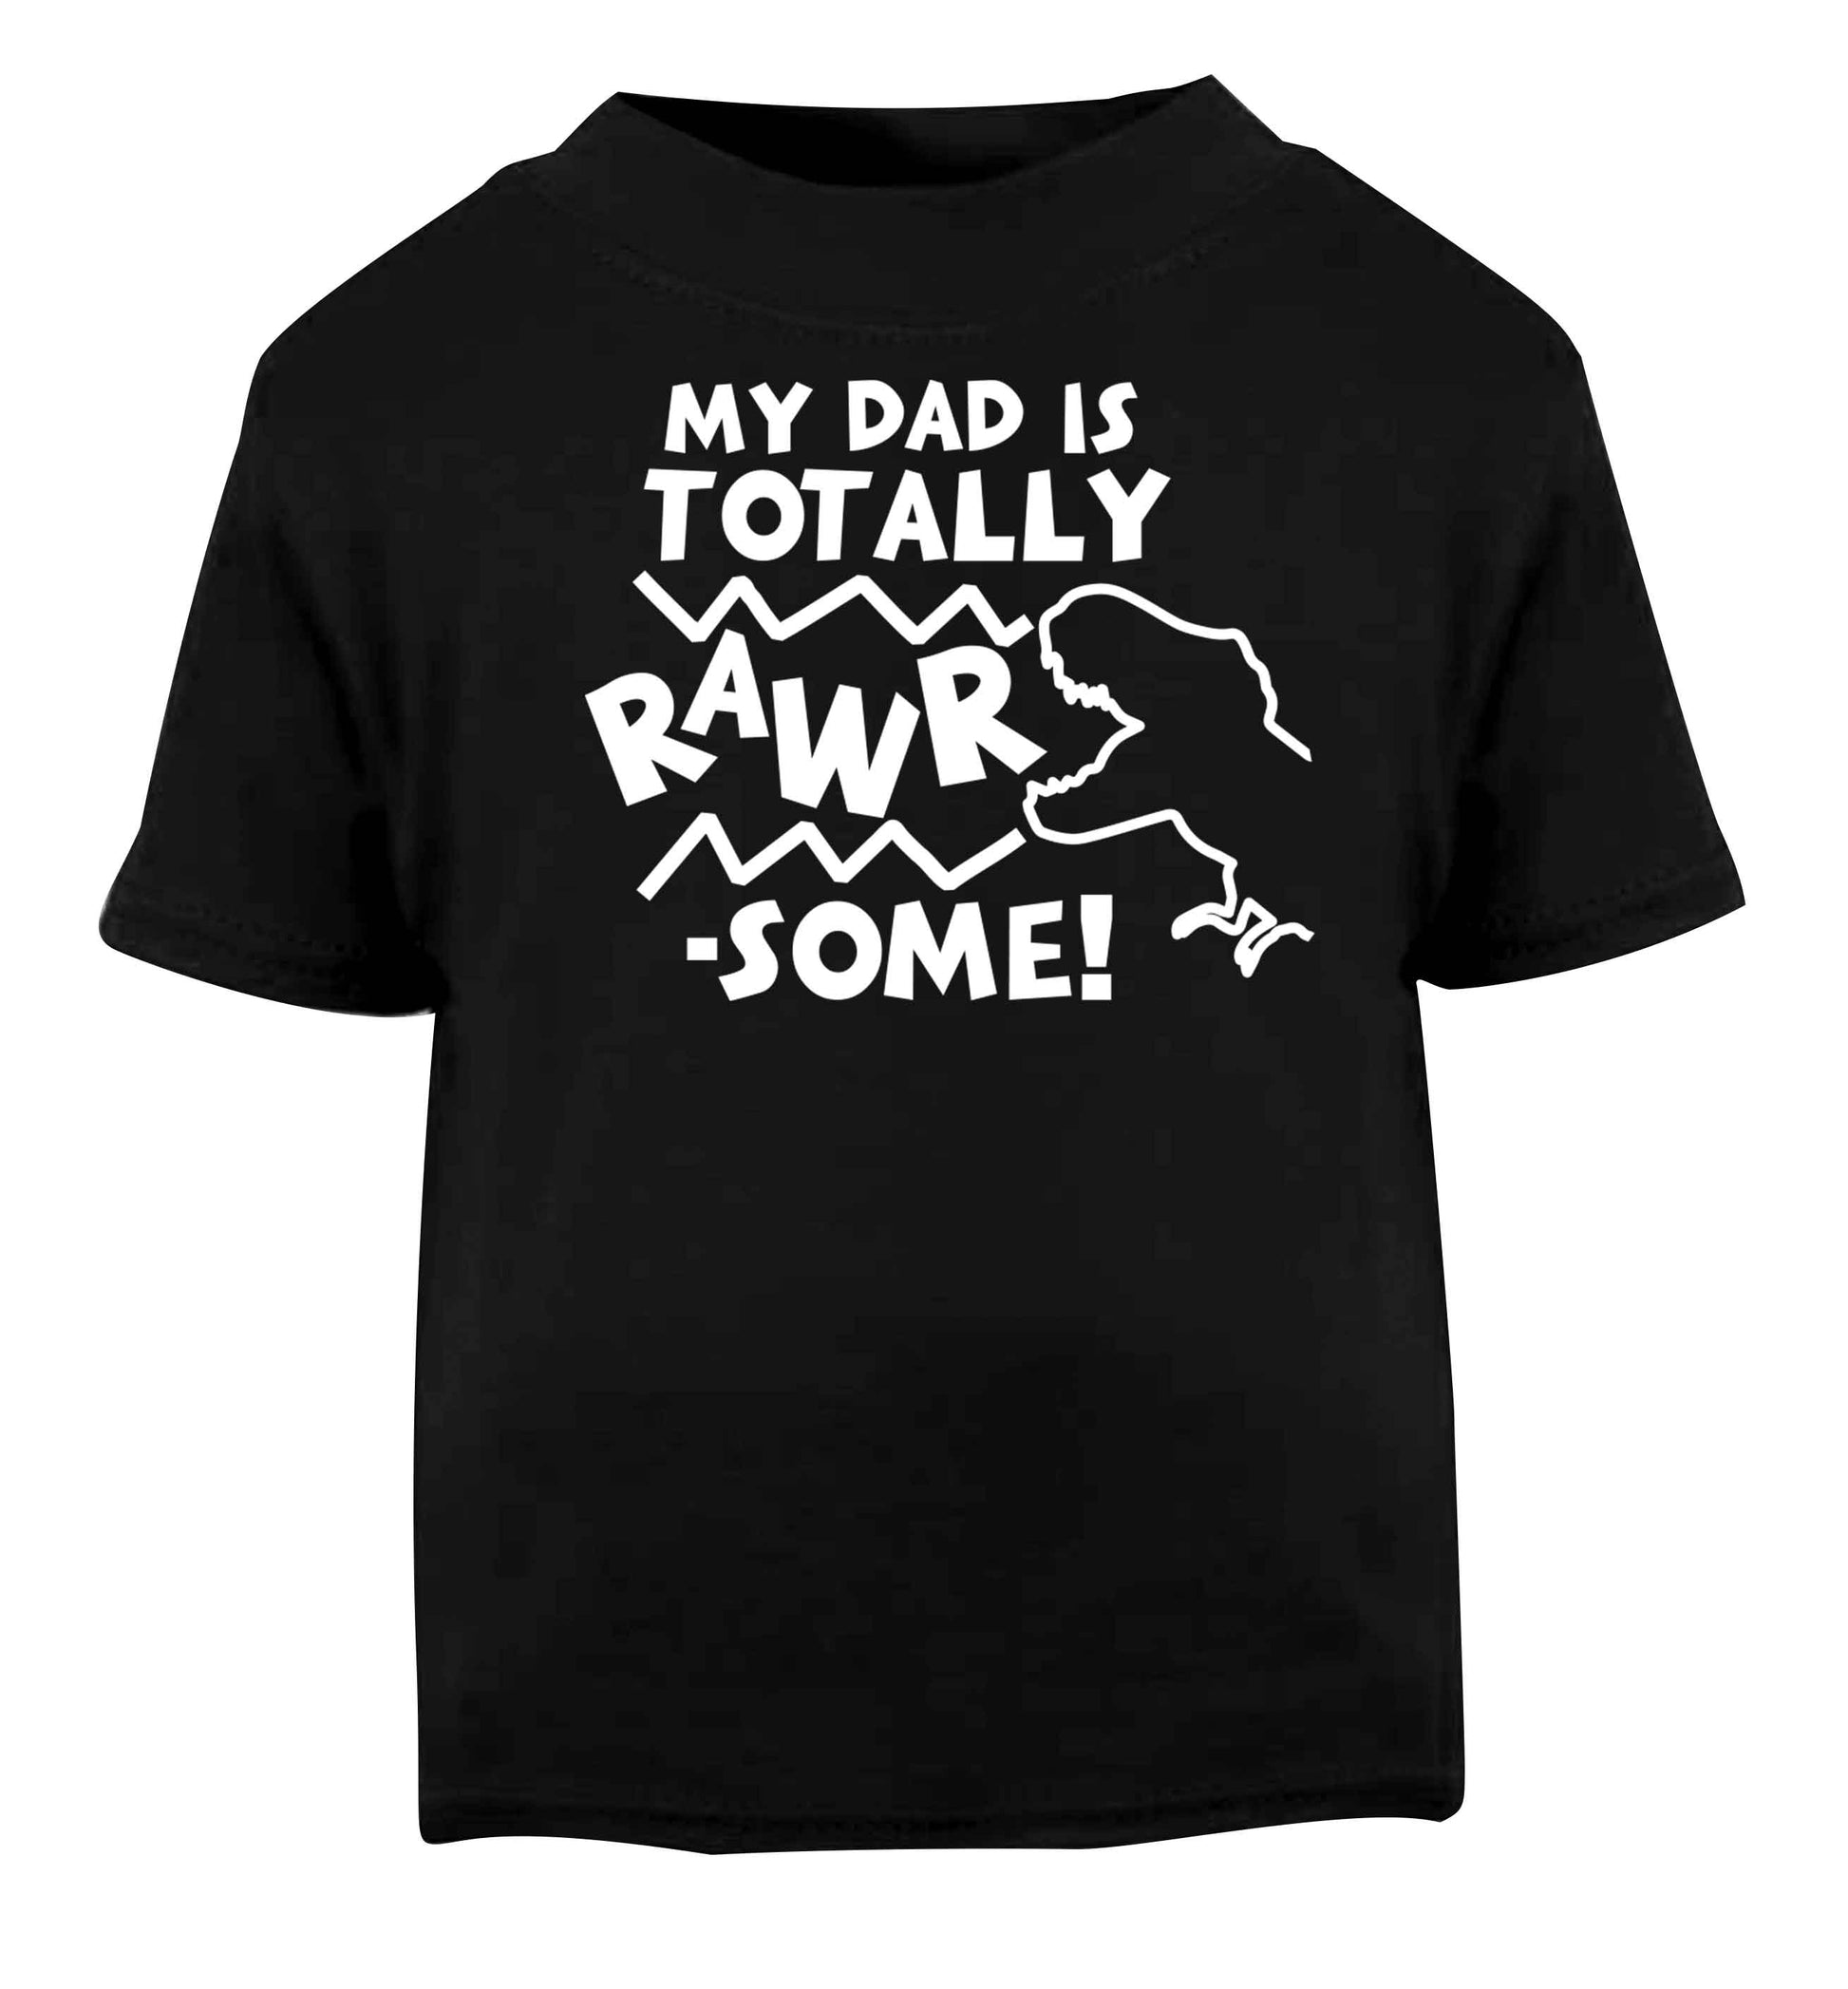 My dad is totally rawrsome Black baby toddler Tshirt 2 years